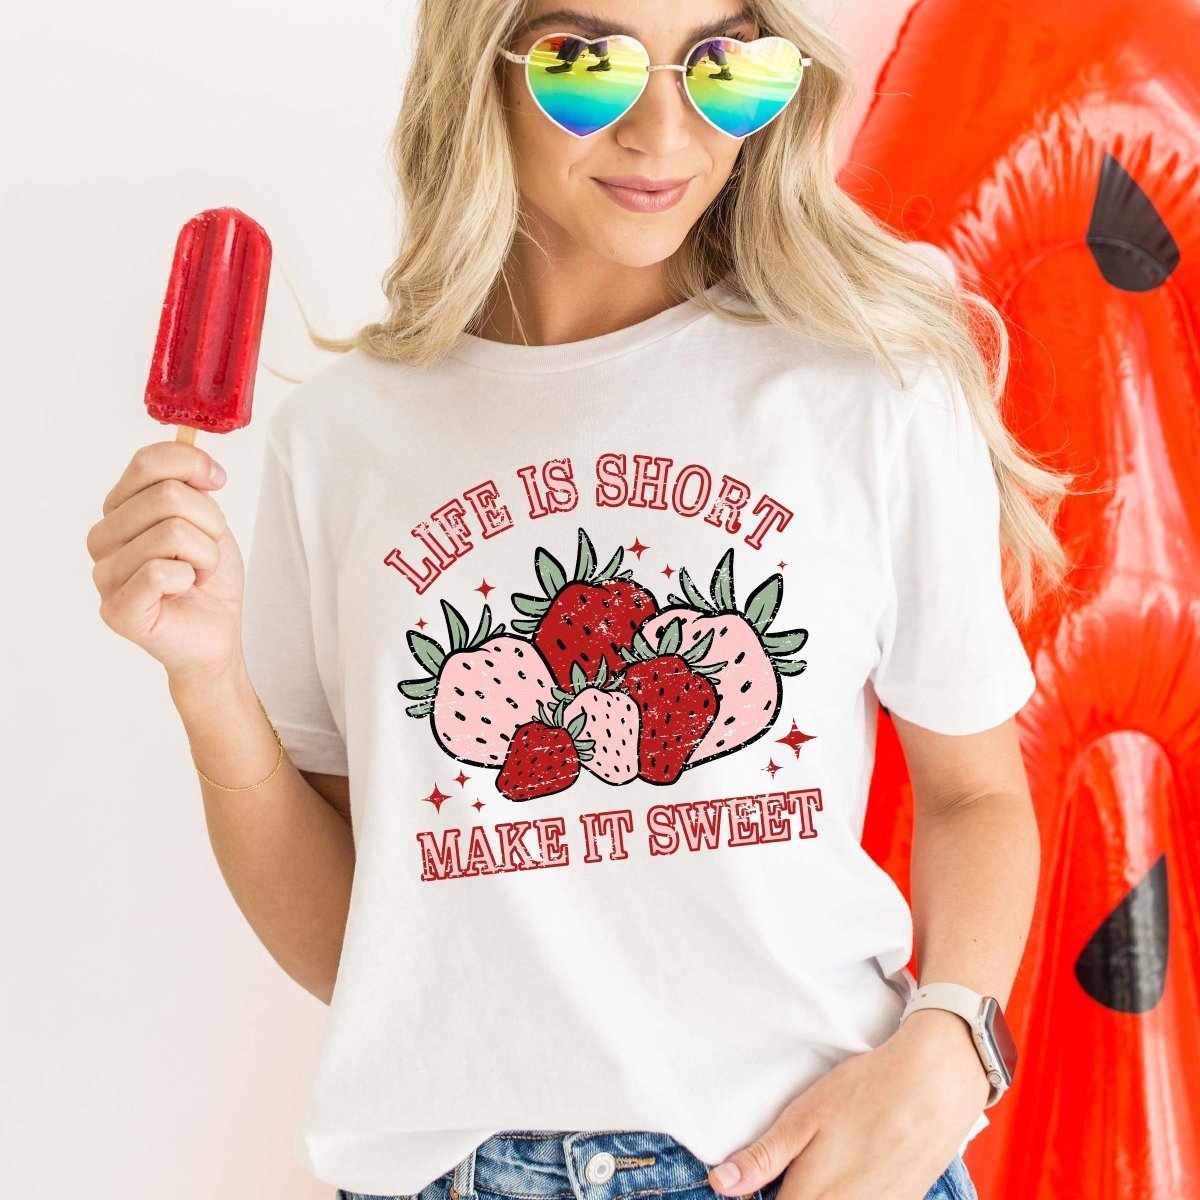 Life is Short Make it Sweet Wholesale Tee - Limeberry Designs